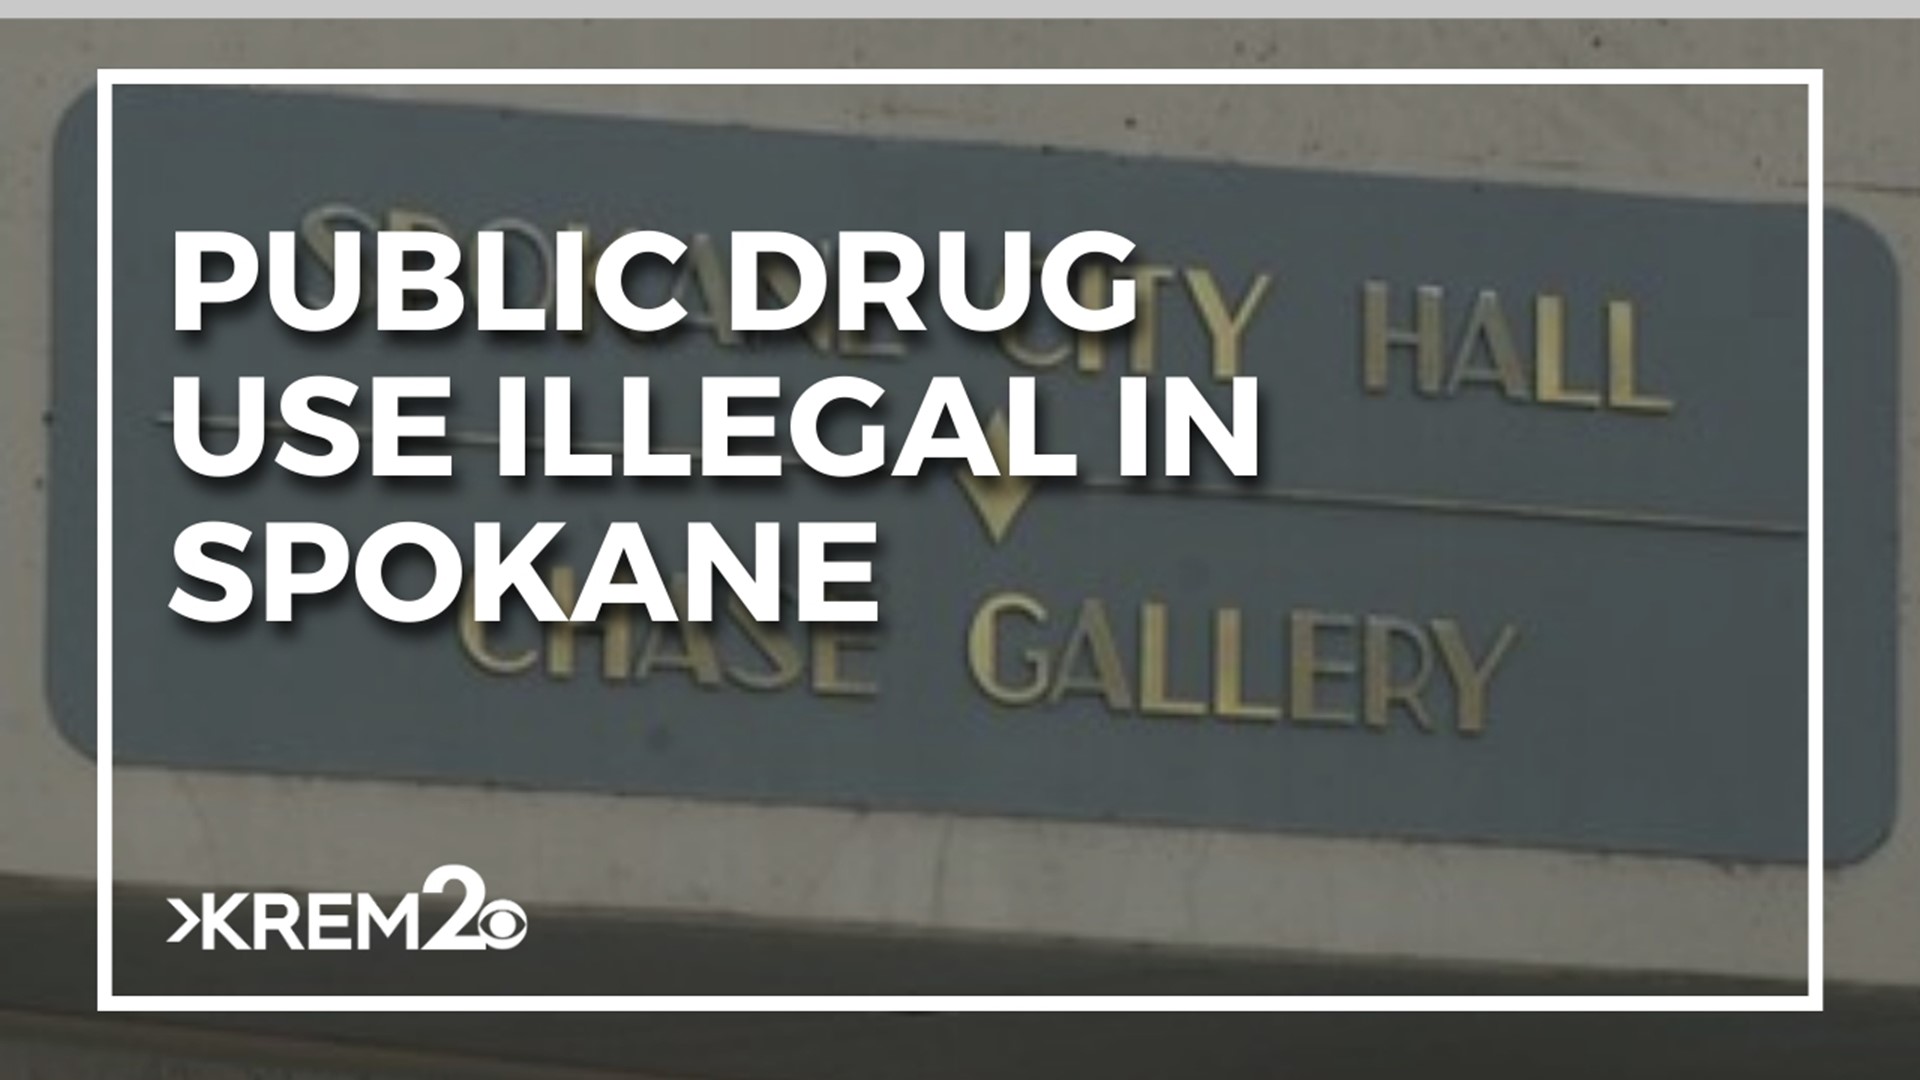 According to the ordinance, enforcement of the new law includes officers seizing all drugs and drug-related items as an alternative to arrest.